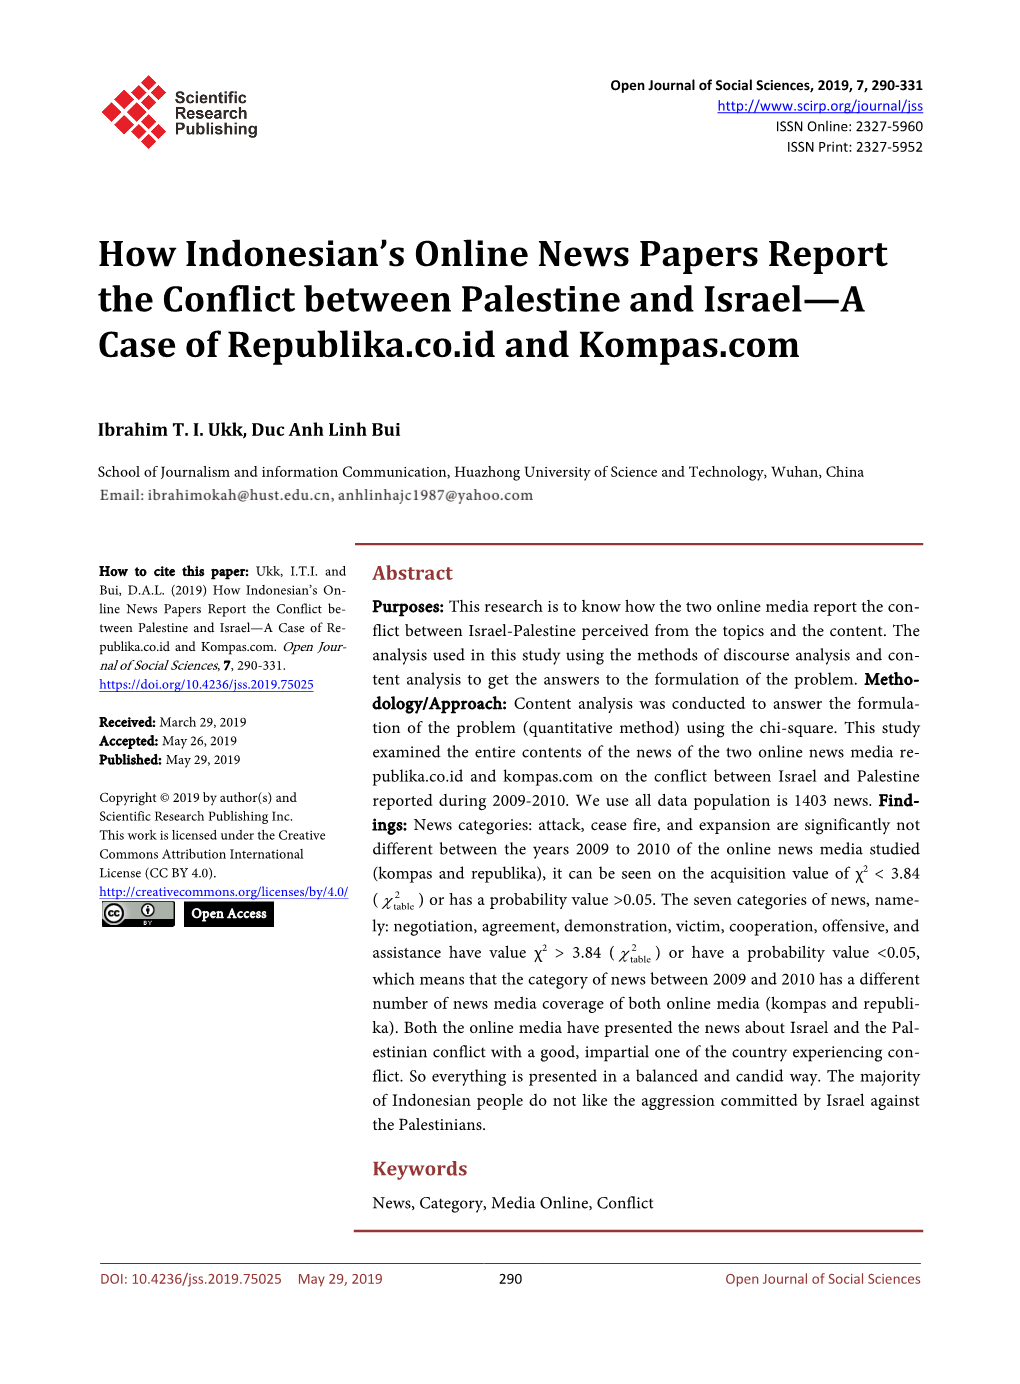 How Indonesian's Online News Papers Report the Conflict Between Palestine and Israel—A Case of Republika.Co.Id and Kompas.Co